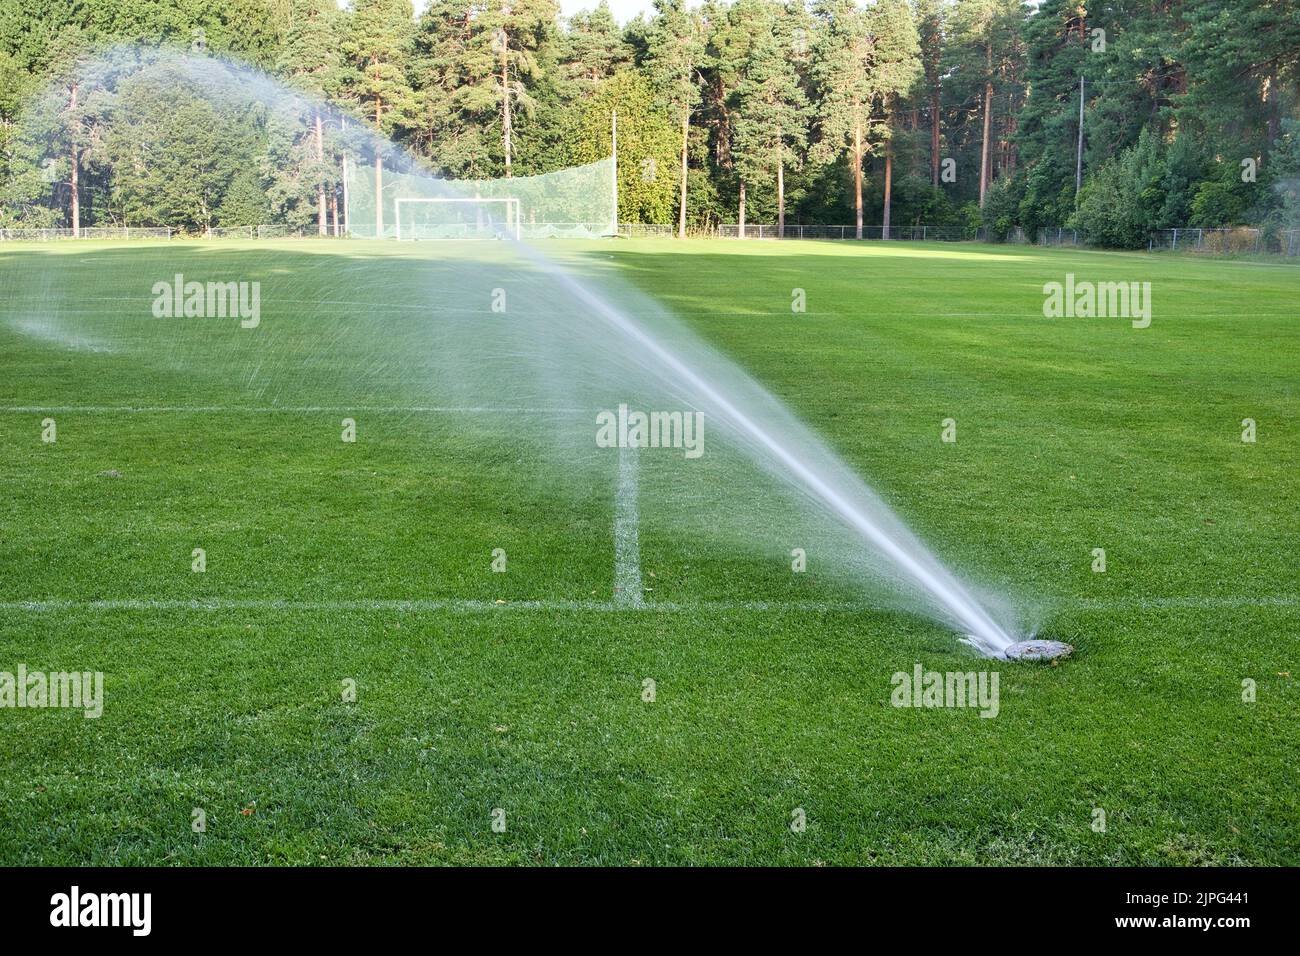 in-ground sprinkler system watering the sports field Stock Photo